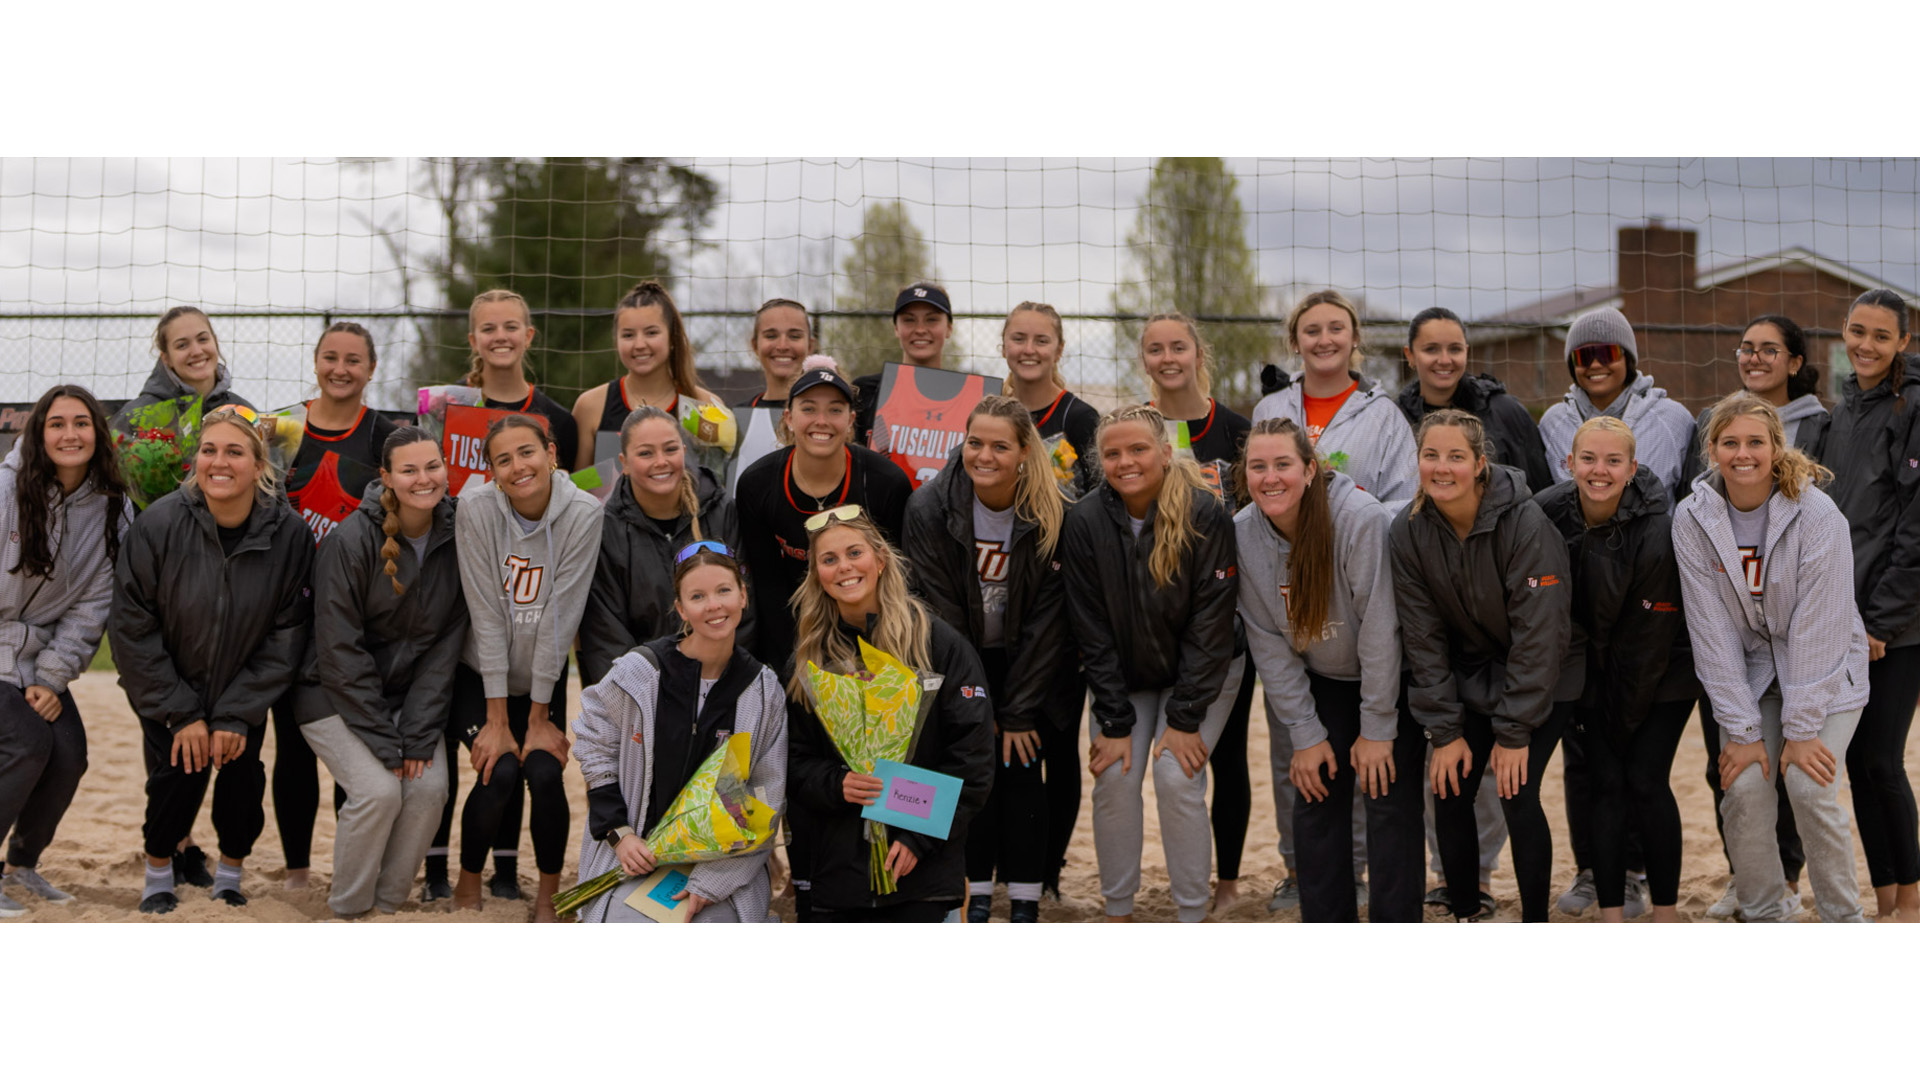 Tusculum claims seventh at AVCA Championships